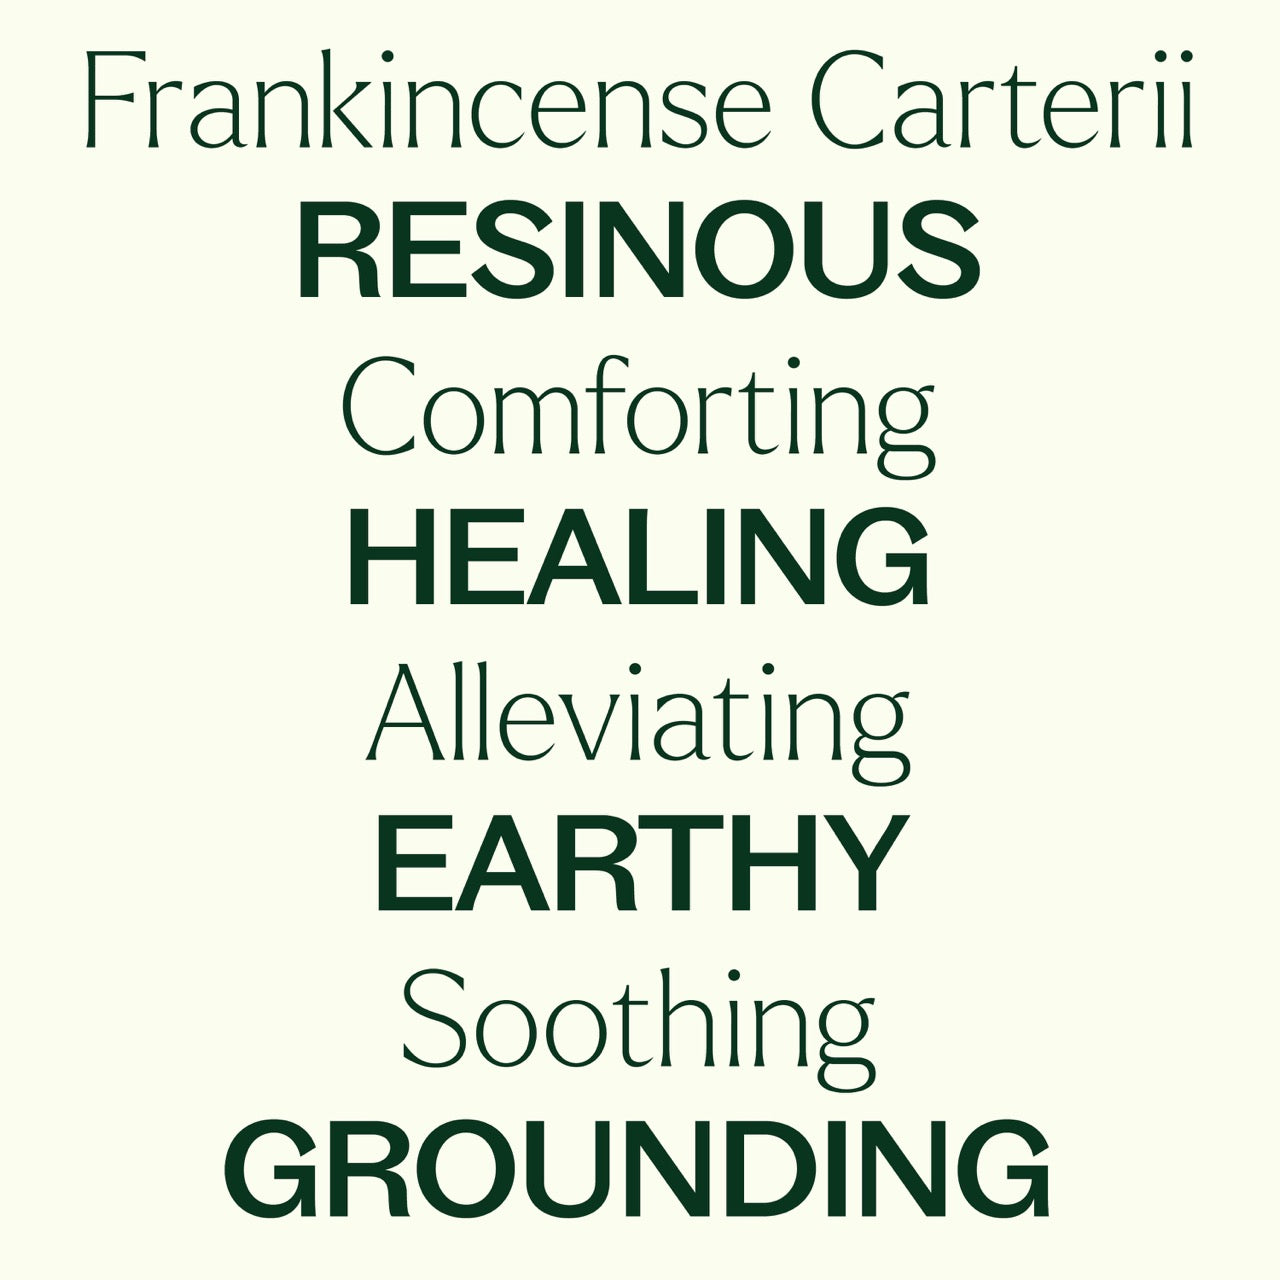 Frankincense Carterii Essential Oil Pre-Diluted Roll-On key features: resinous, comforting, healing, alleviating, earthy, soothing, grounding